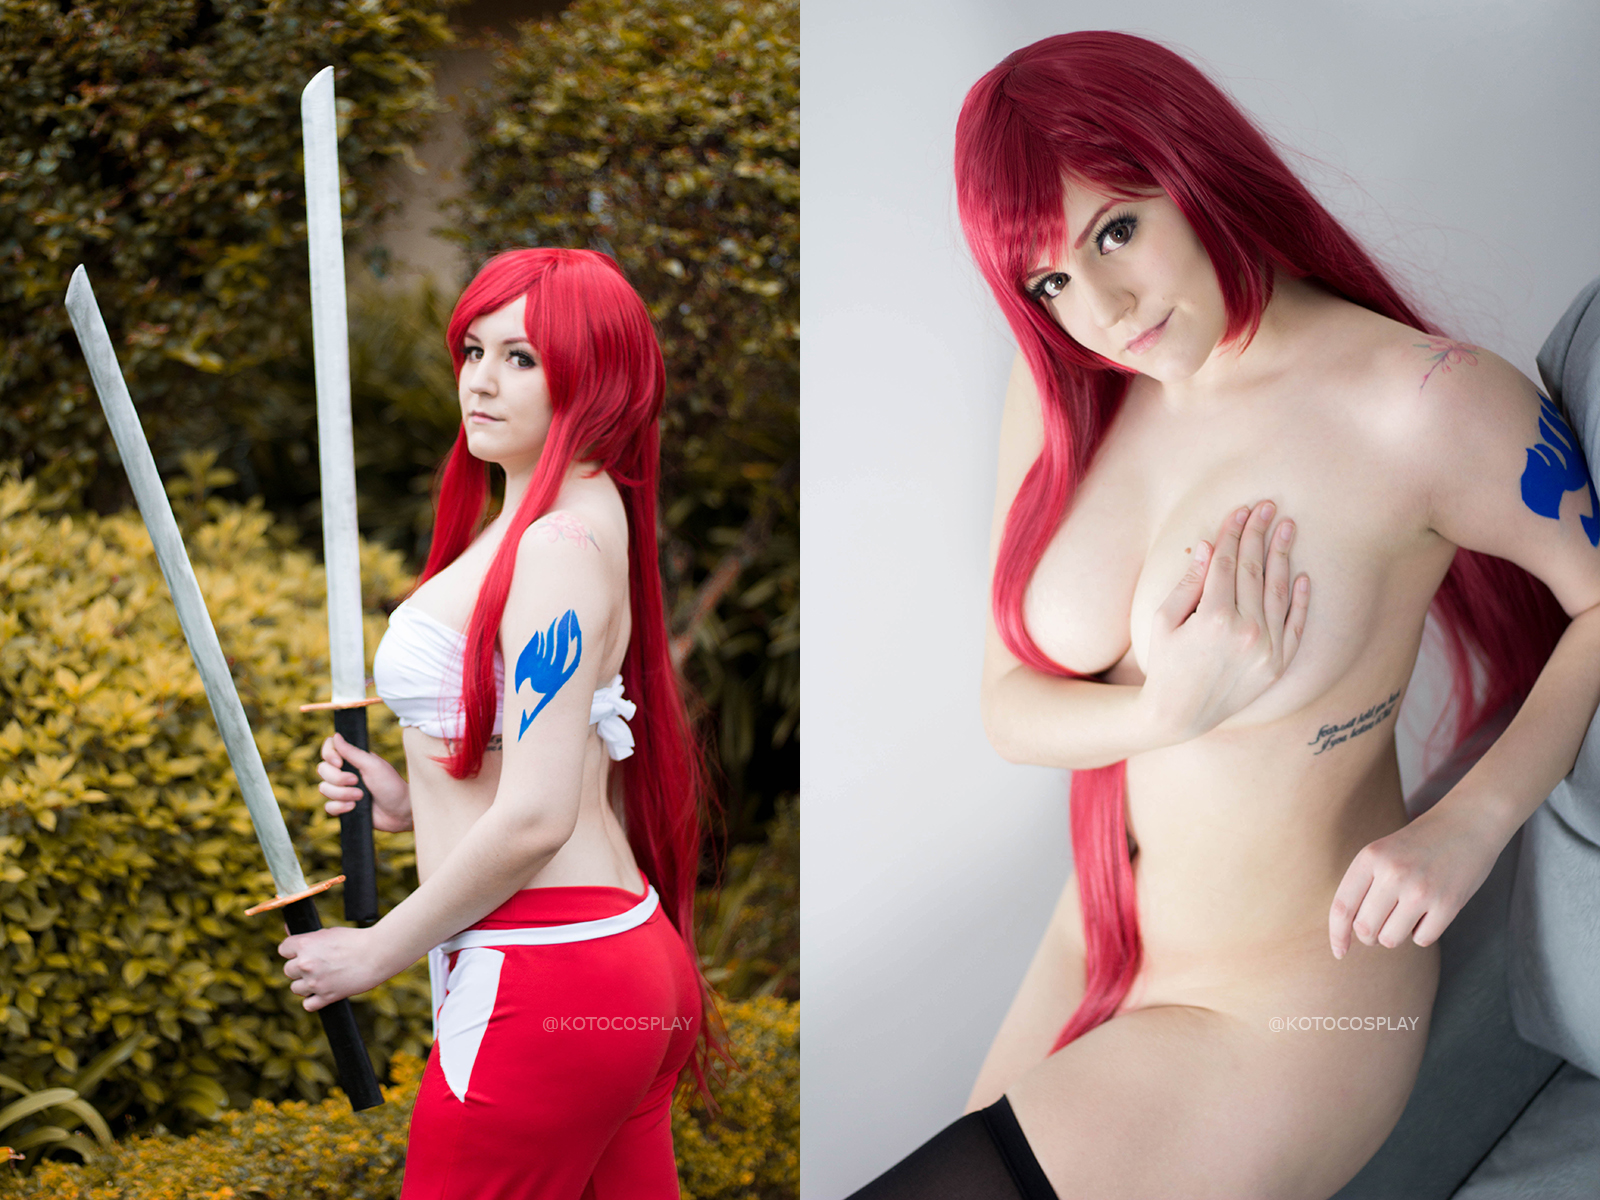 Self Erza Scarlet ON/OFF by Koto Cosplay. 